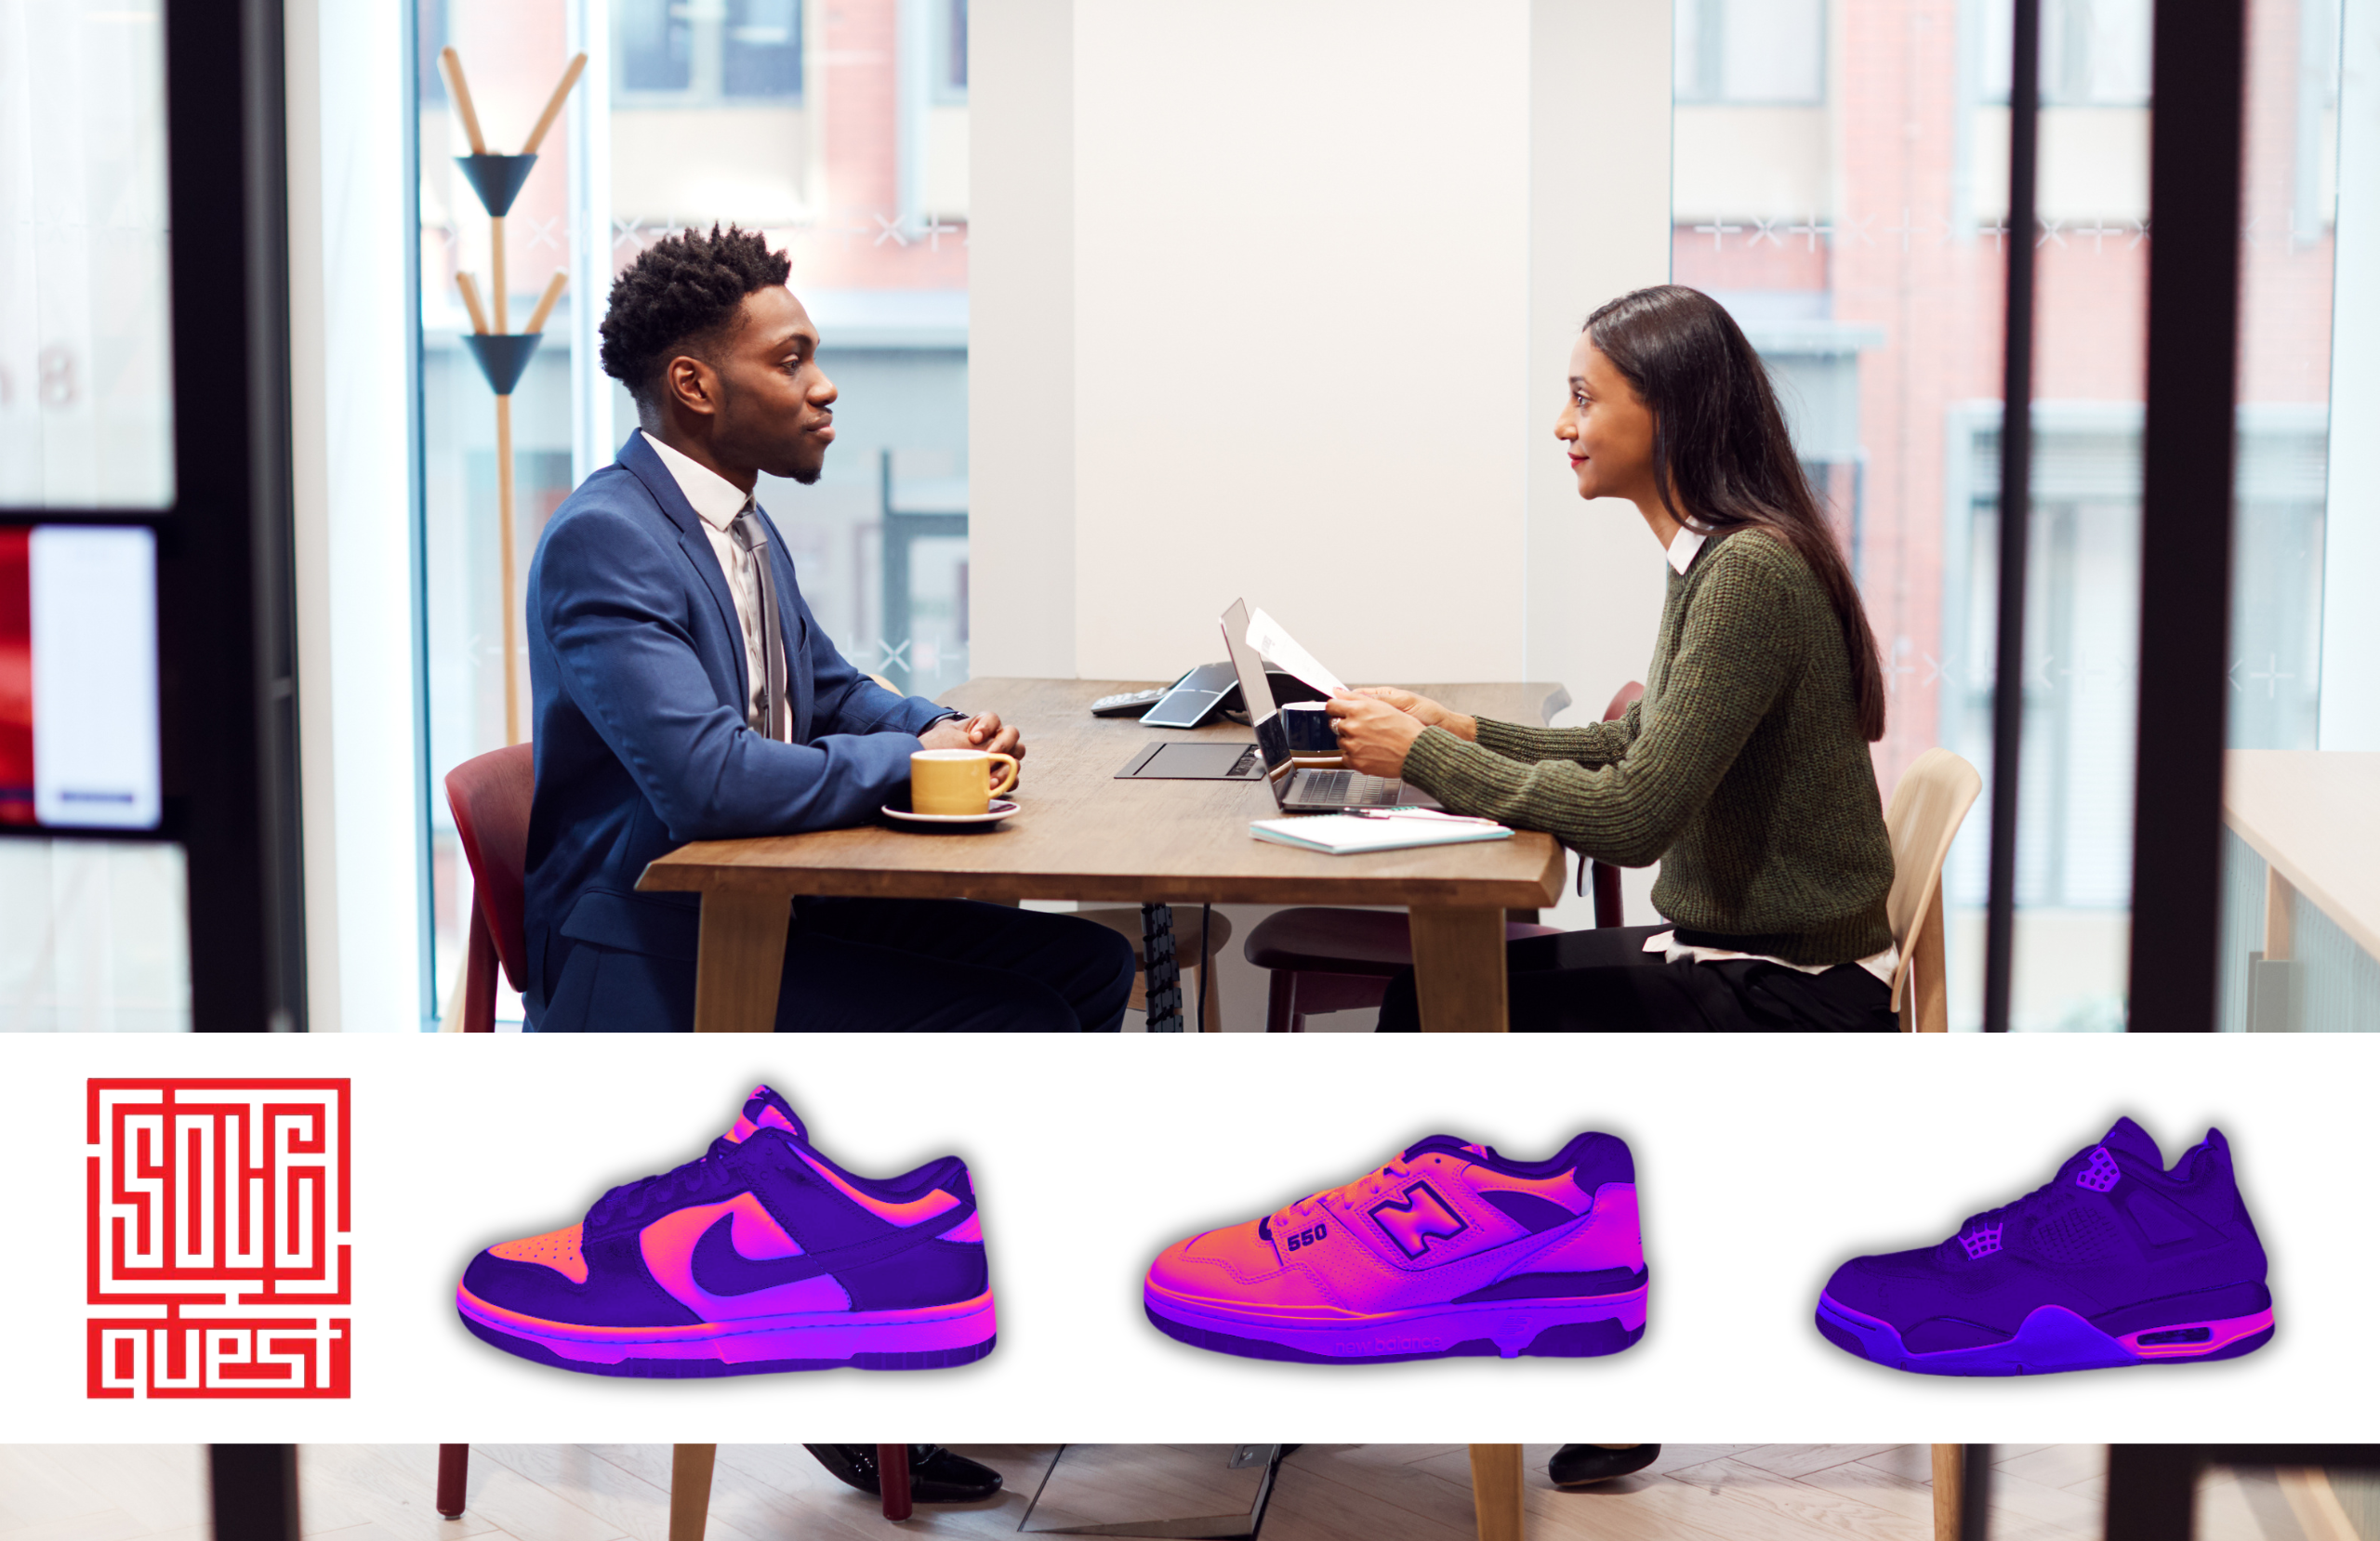 Top 5 Sneakers You Can Wear to a Job Interview